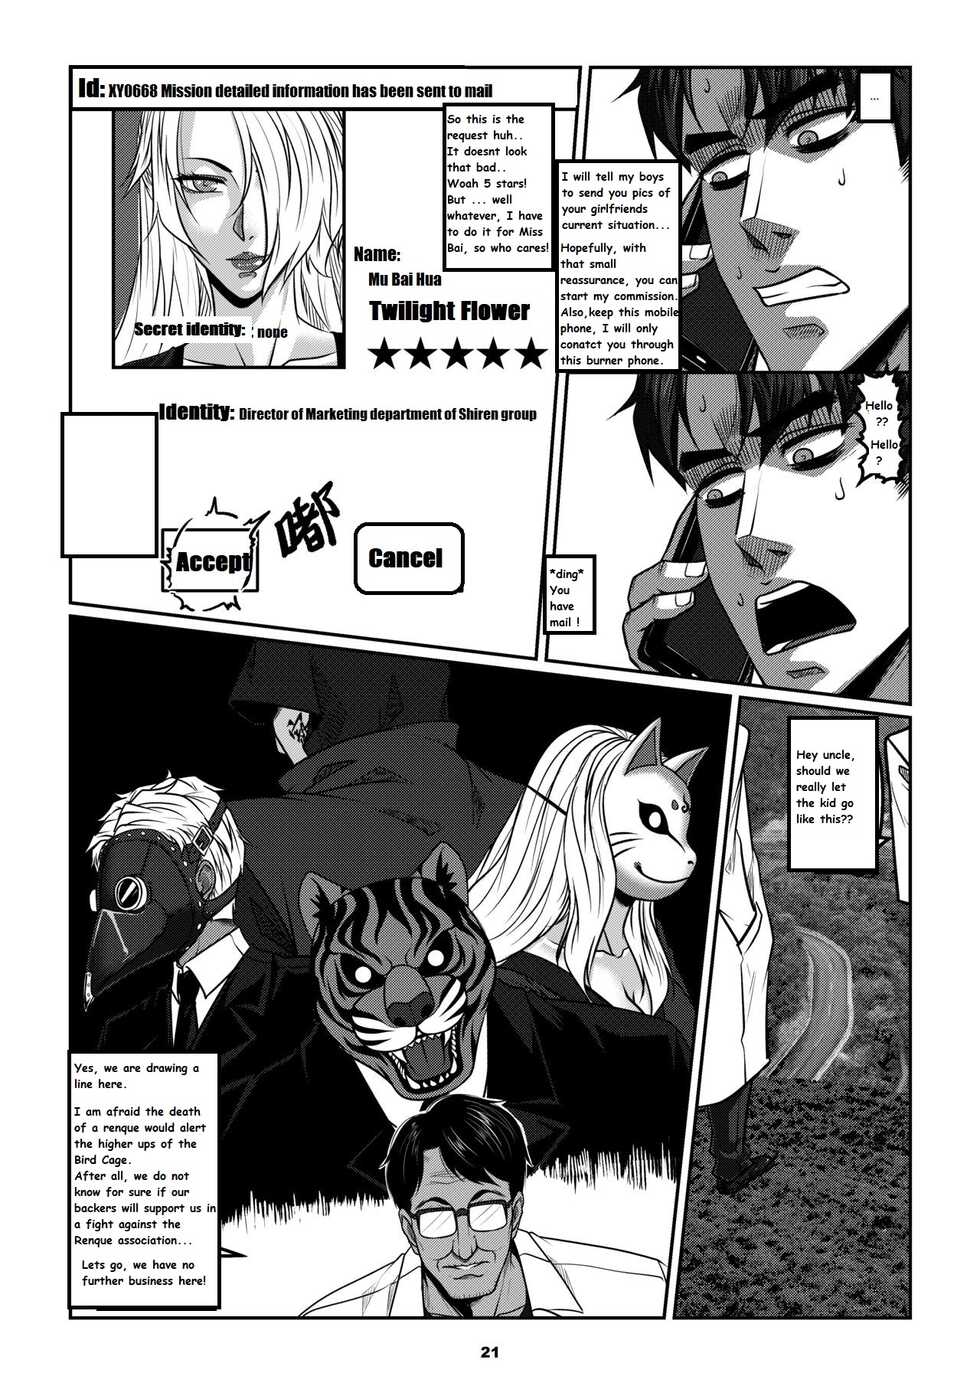 Sparrow 07 [ENG] (GodLetter) - Page 24